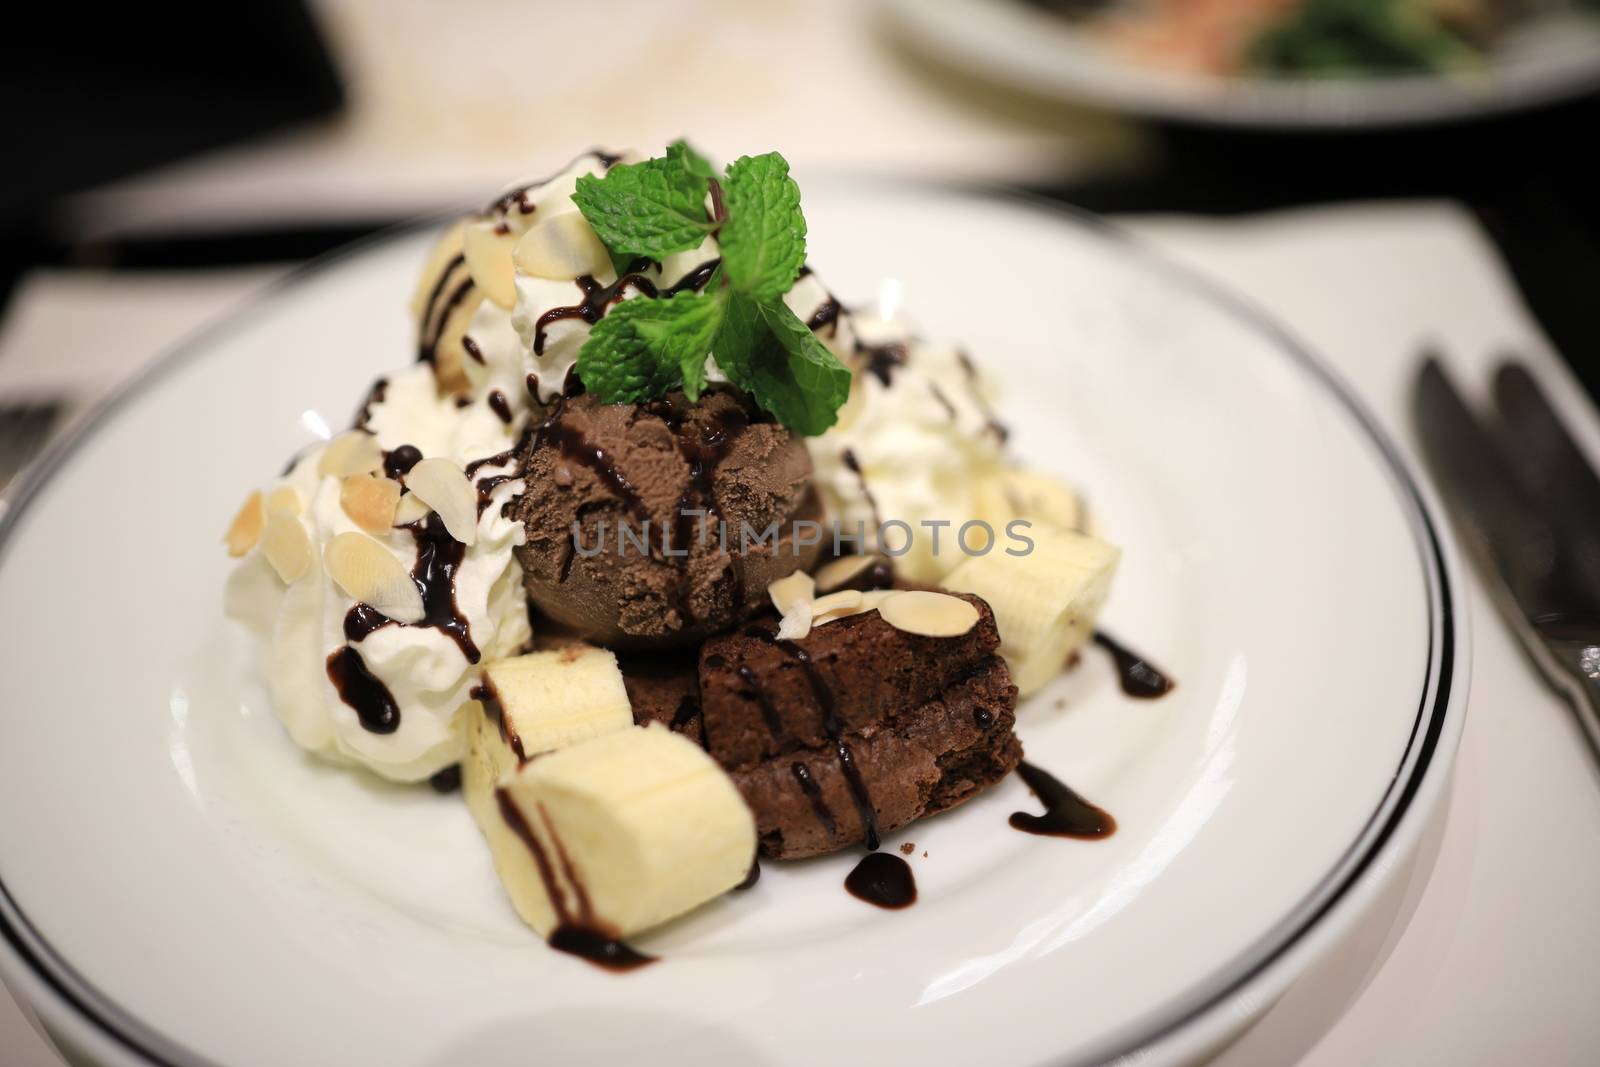 Chocolate ice cream and sliced bananas Garnish with mint leaves. With white mousse and sliced almonds in a white plate Topped with chocolate sauce to look delicious. Selective focus.